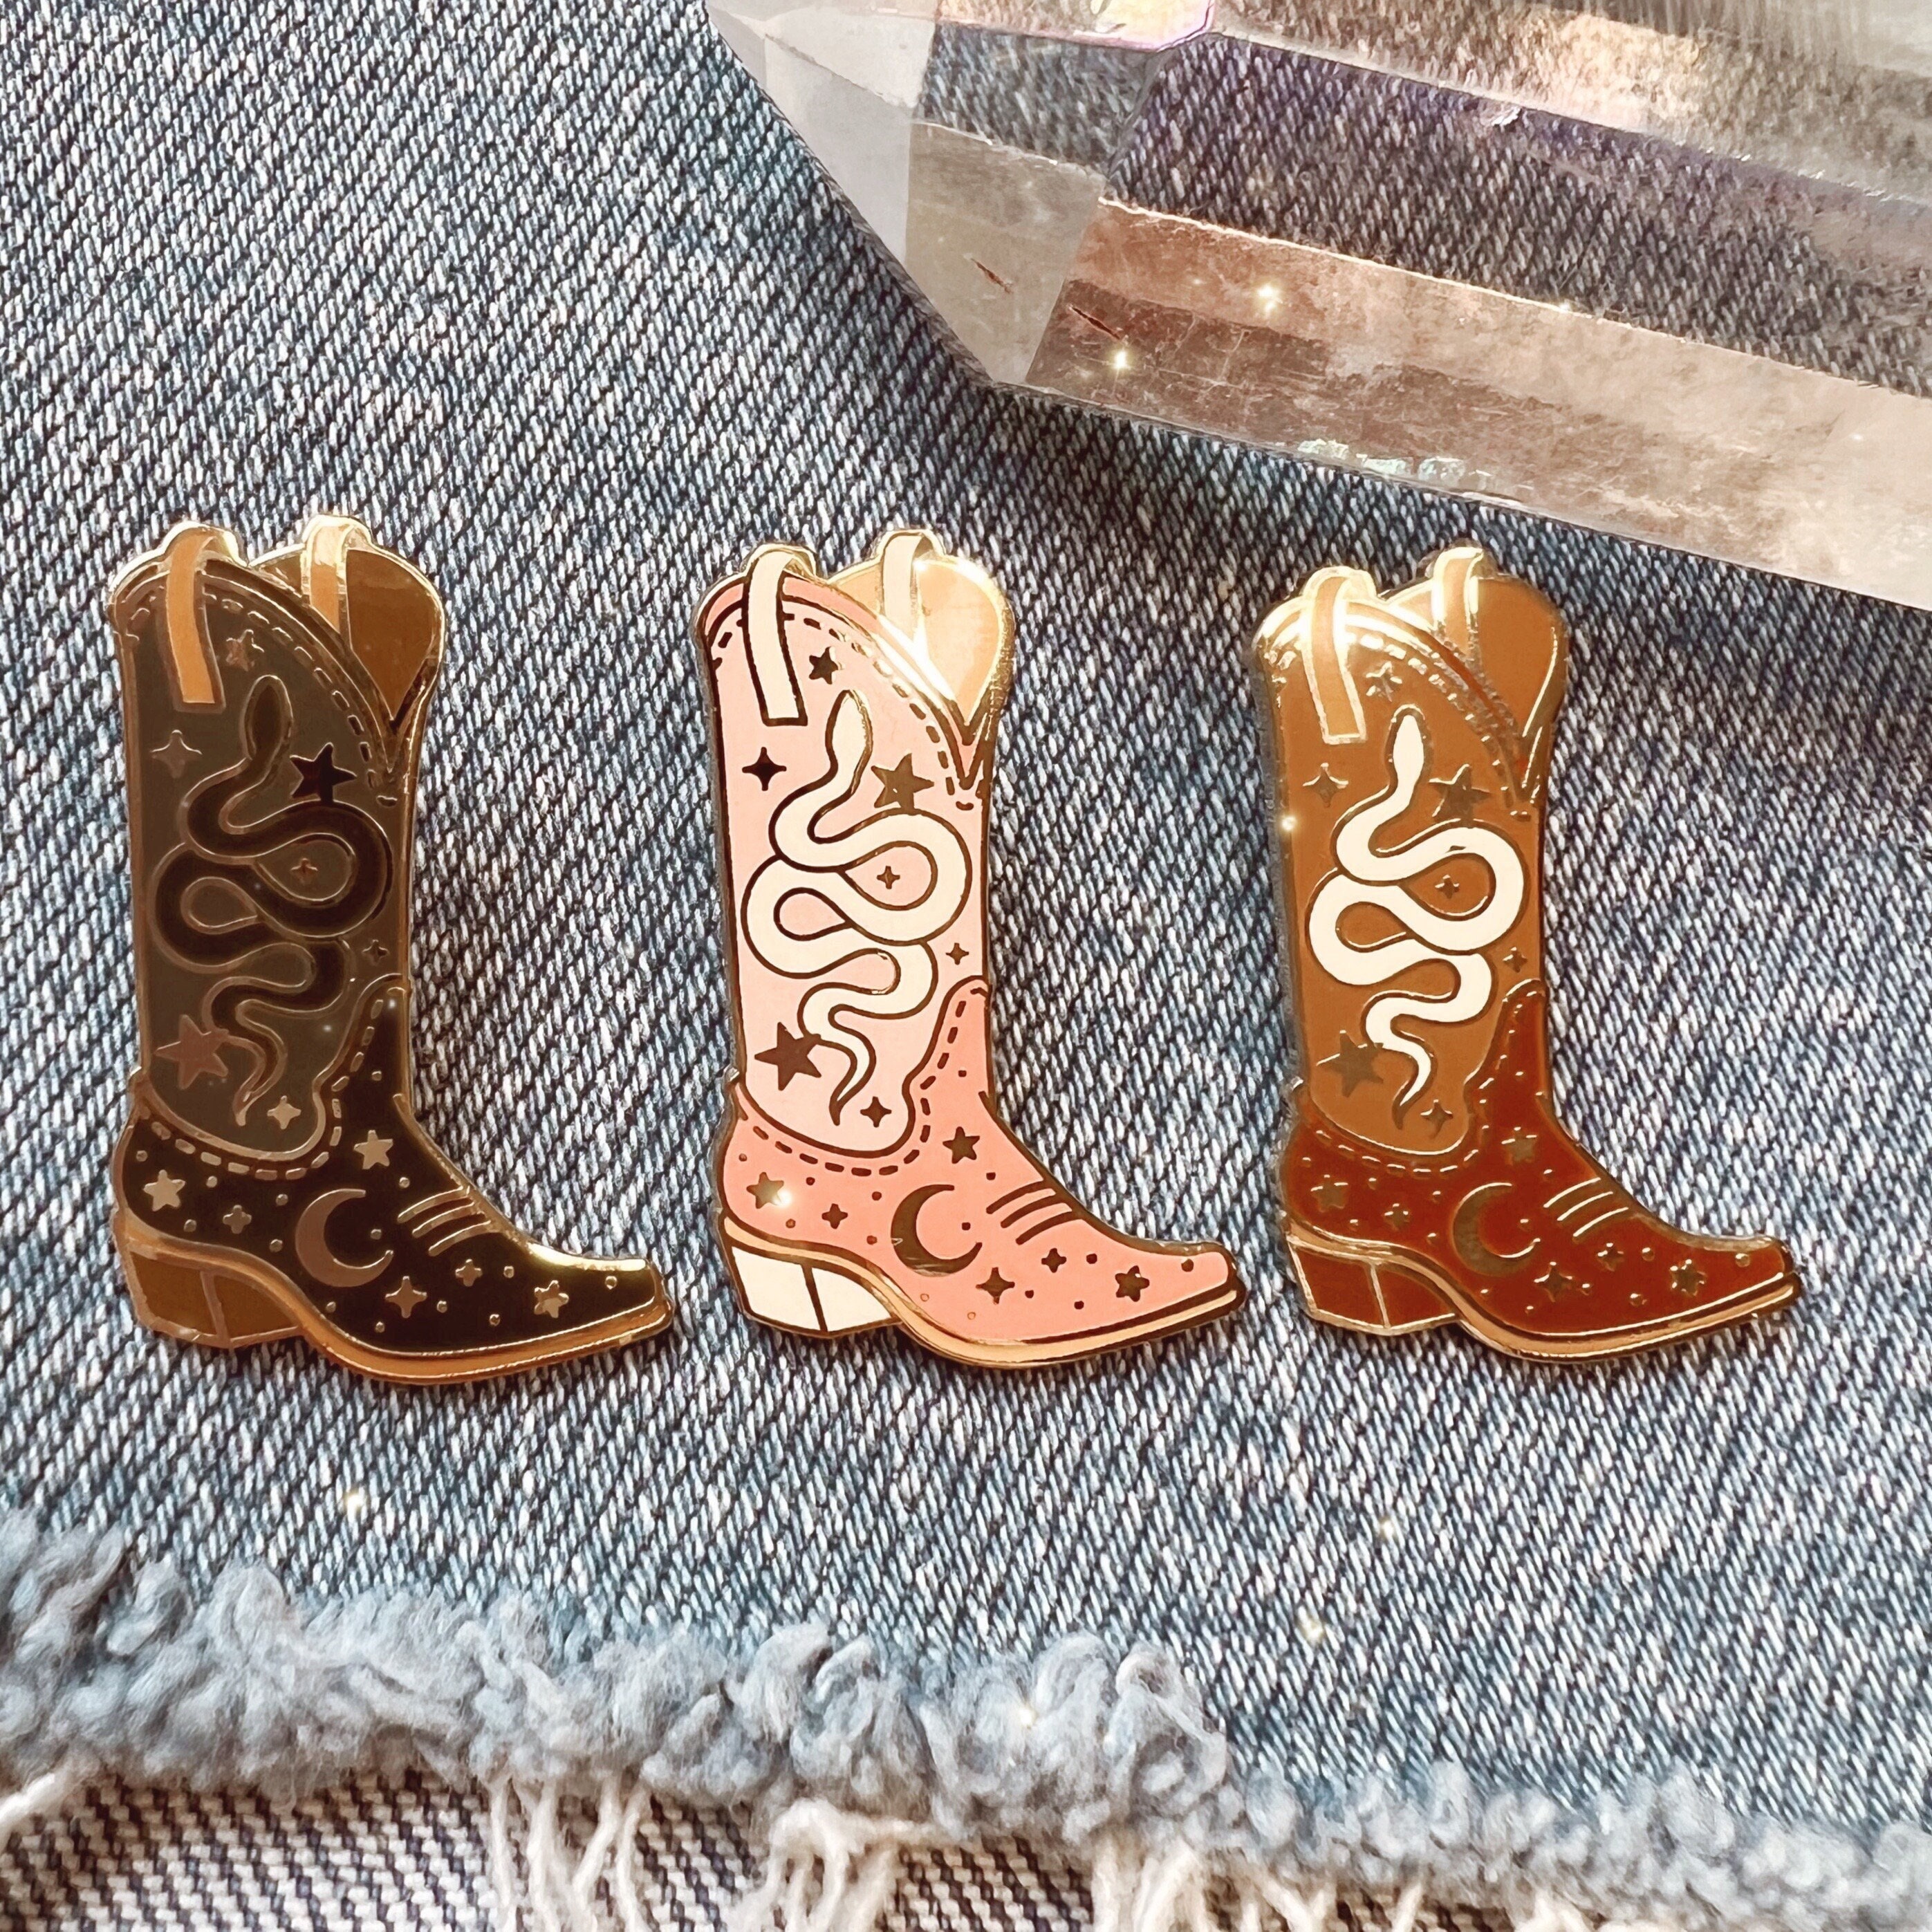 Pin on Cowboy Boot Accessories (Tools, Tips and More)